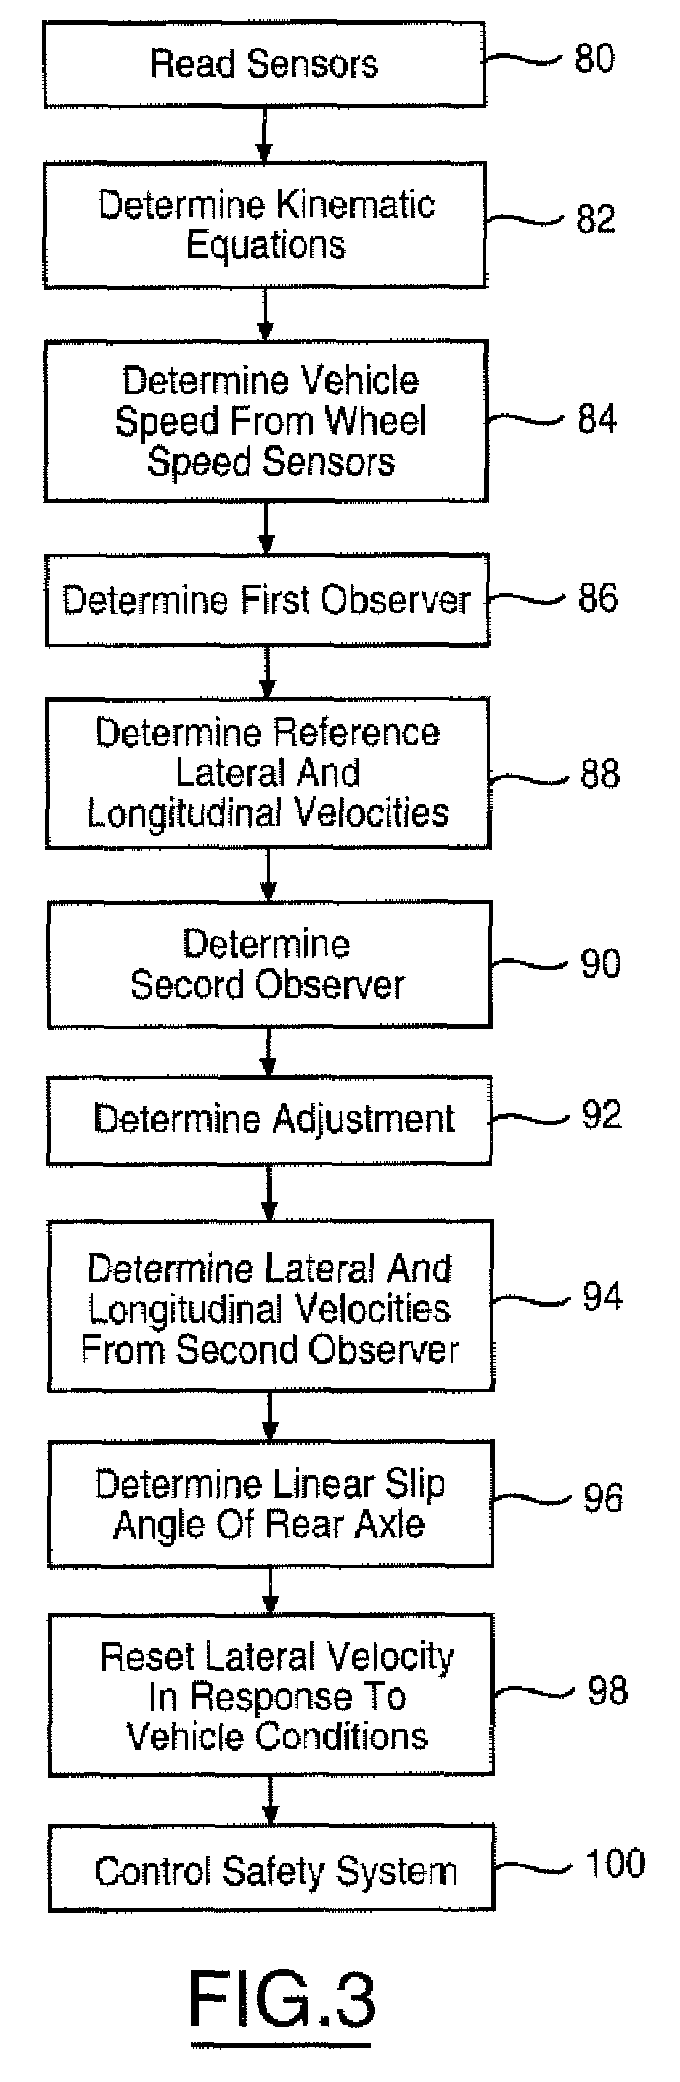 Lateral and longitudinal velocity determination for an automotive vehicle